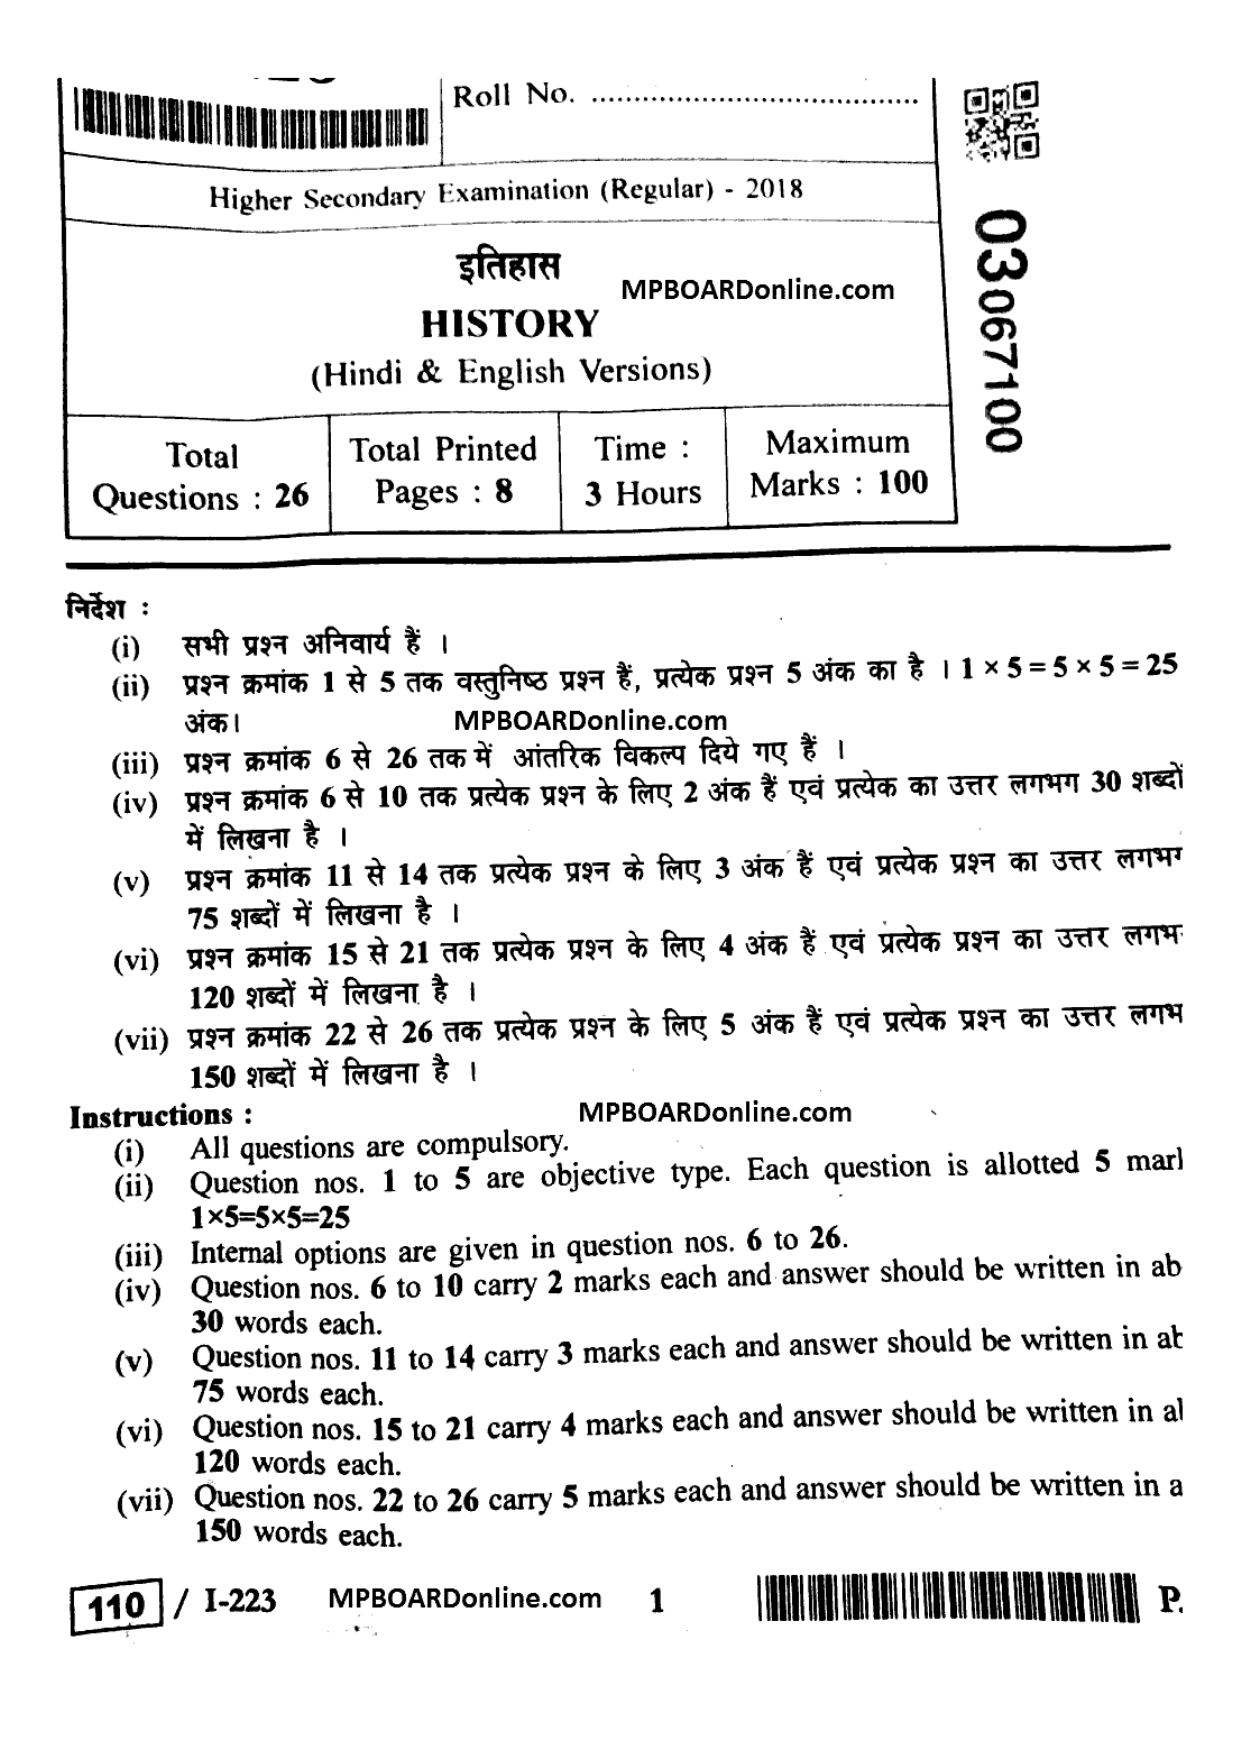 MP Board Class 12 History 2018 Question Paper - Page 1